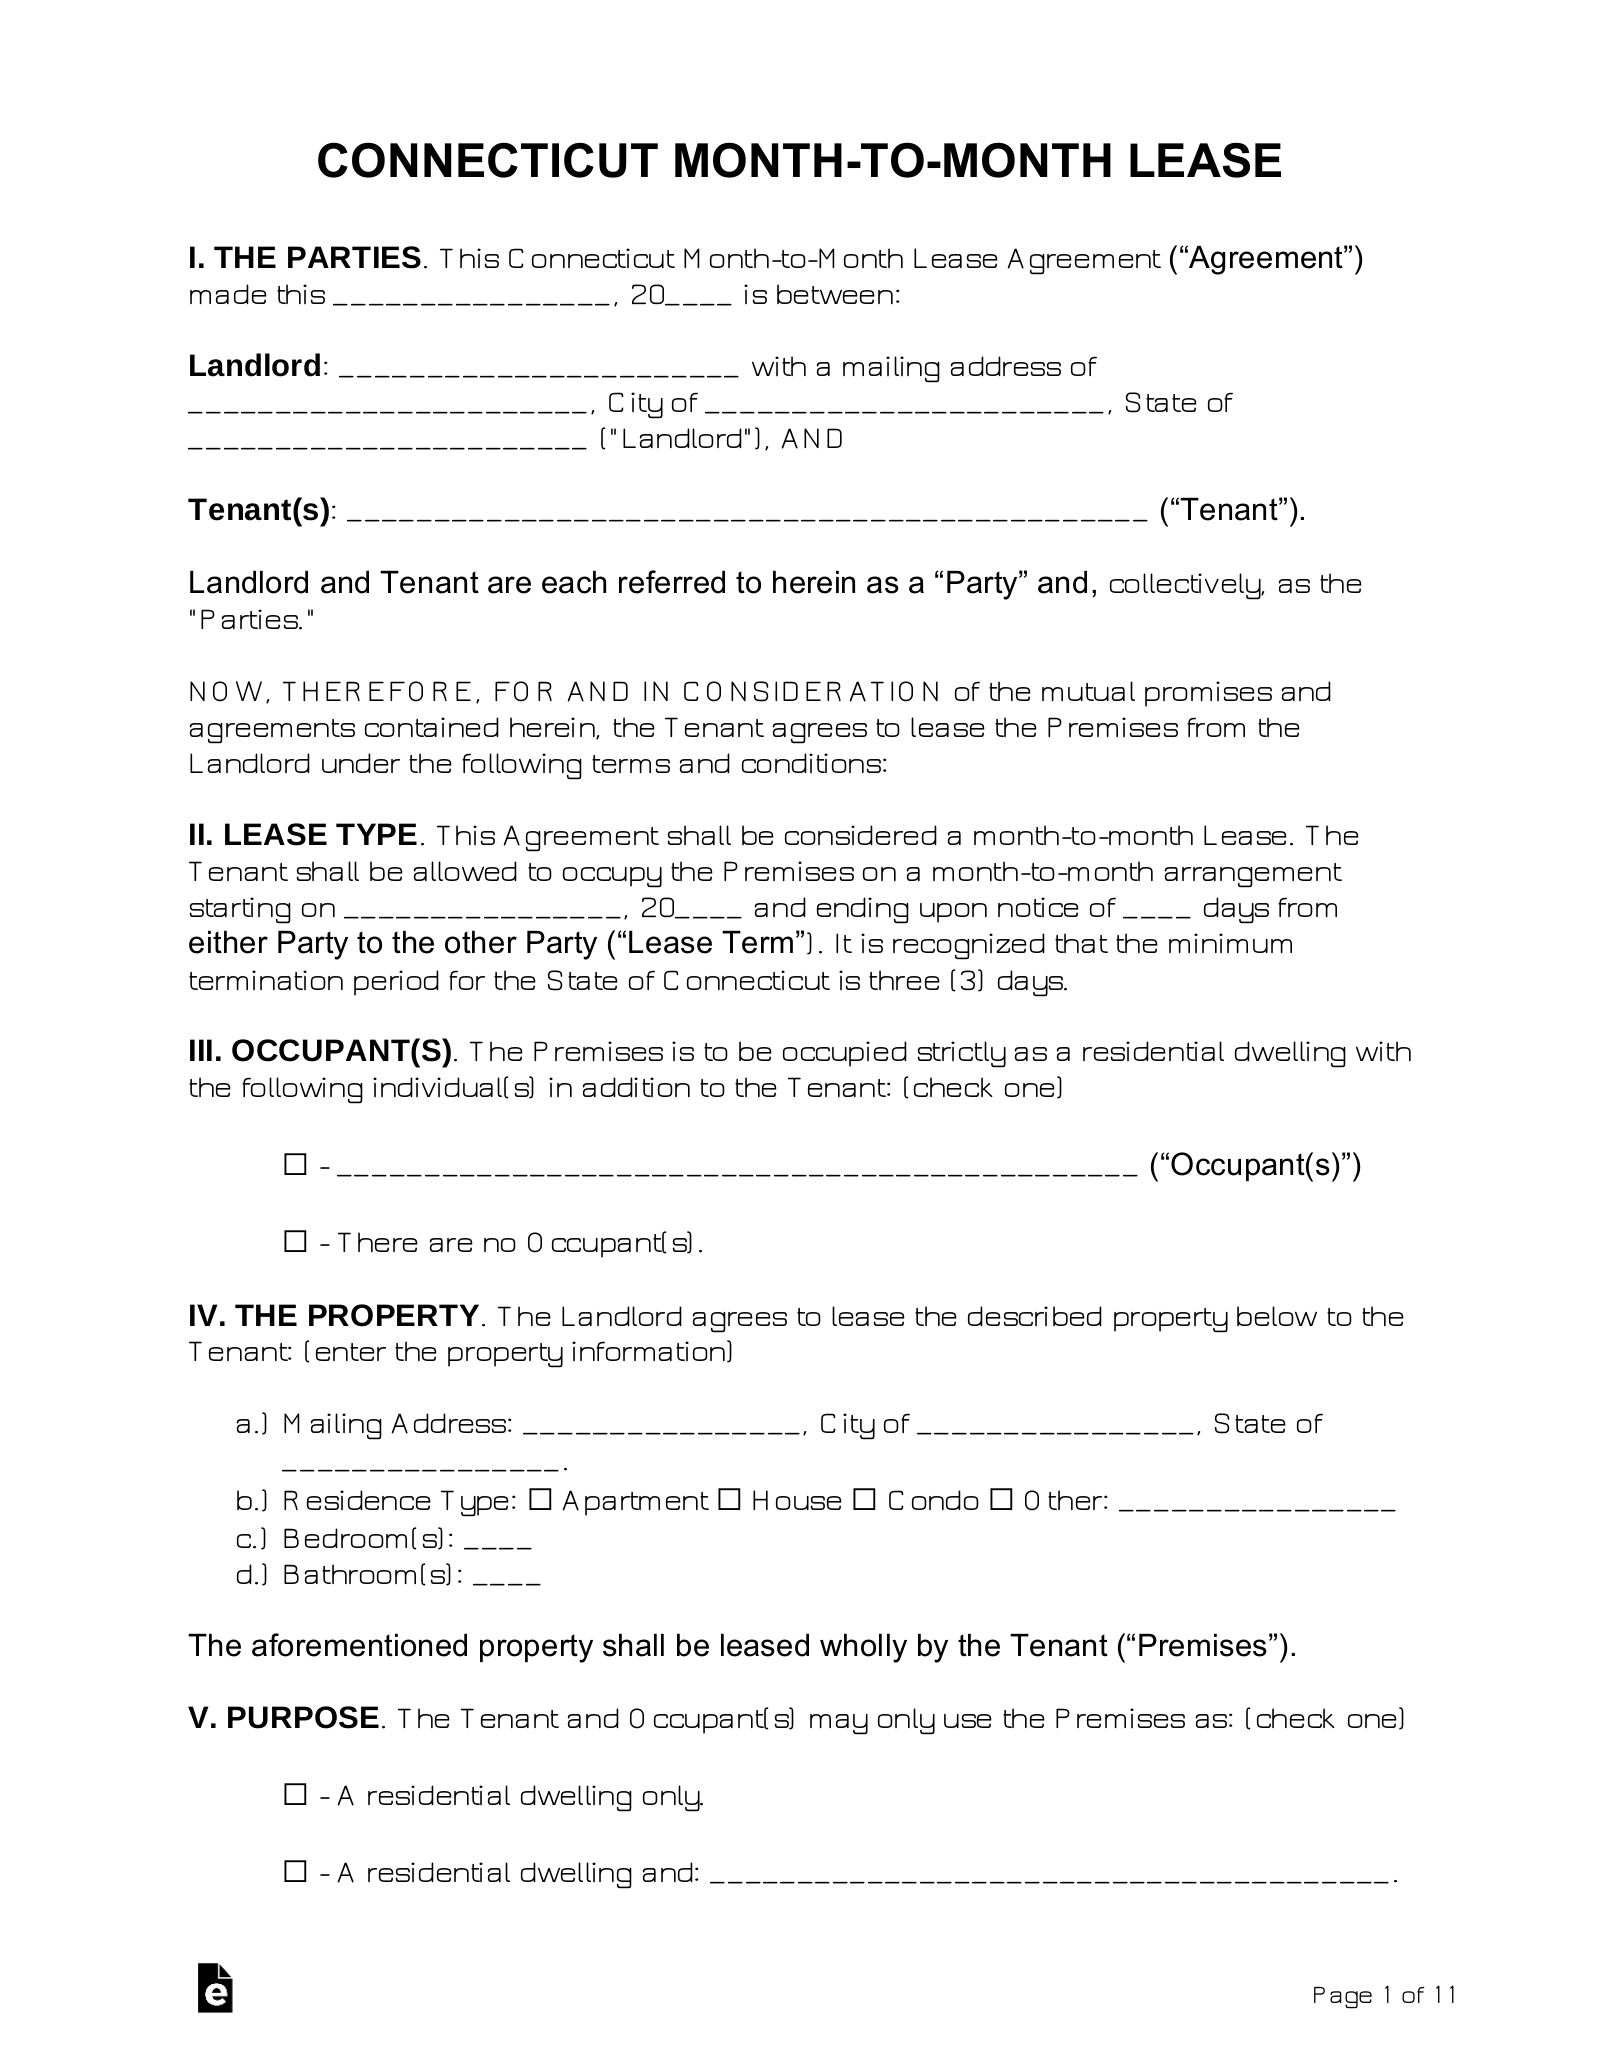 Connecticut Month-to-Month Rental Agreement Form